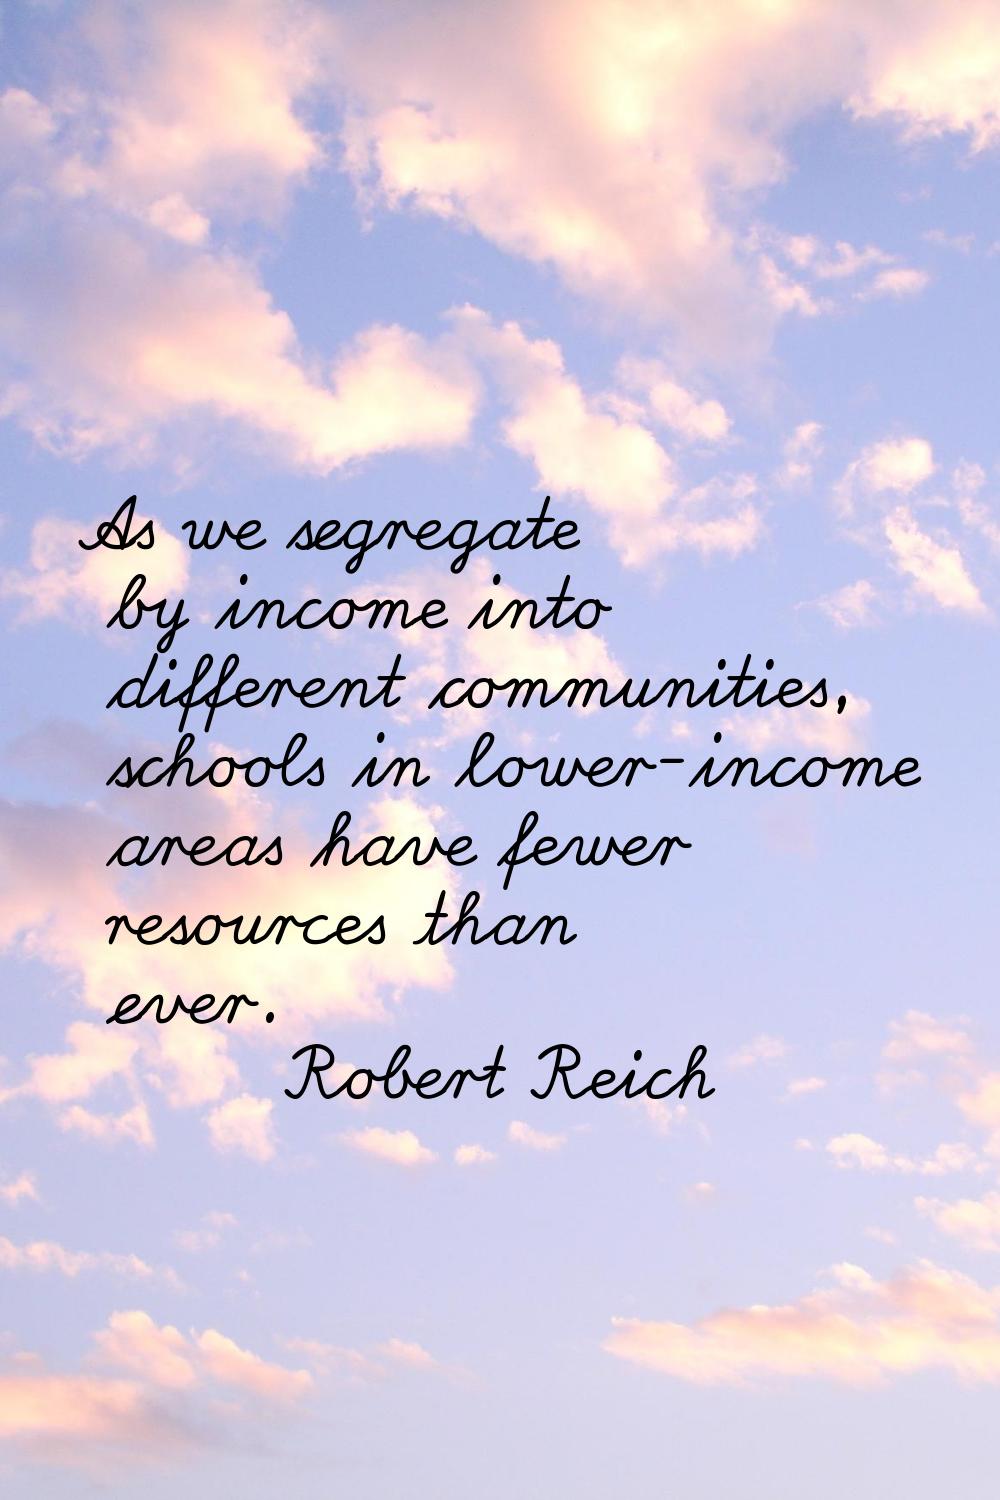 As we segregate by income into different communities, schools in lower-income areas have fewer reso